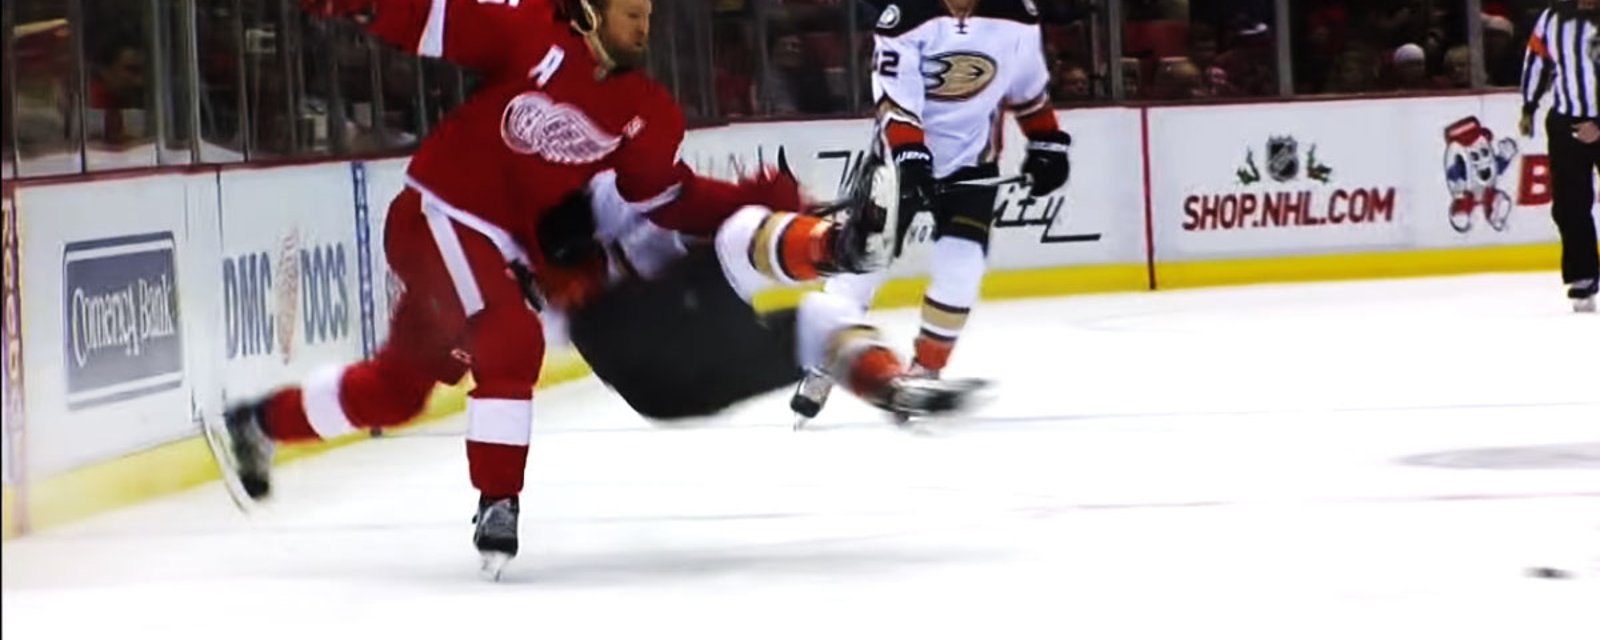 Must See: Kronwall doing his thing!